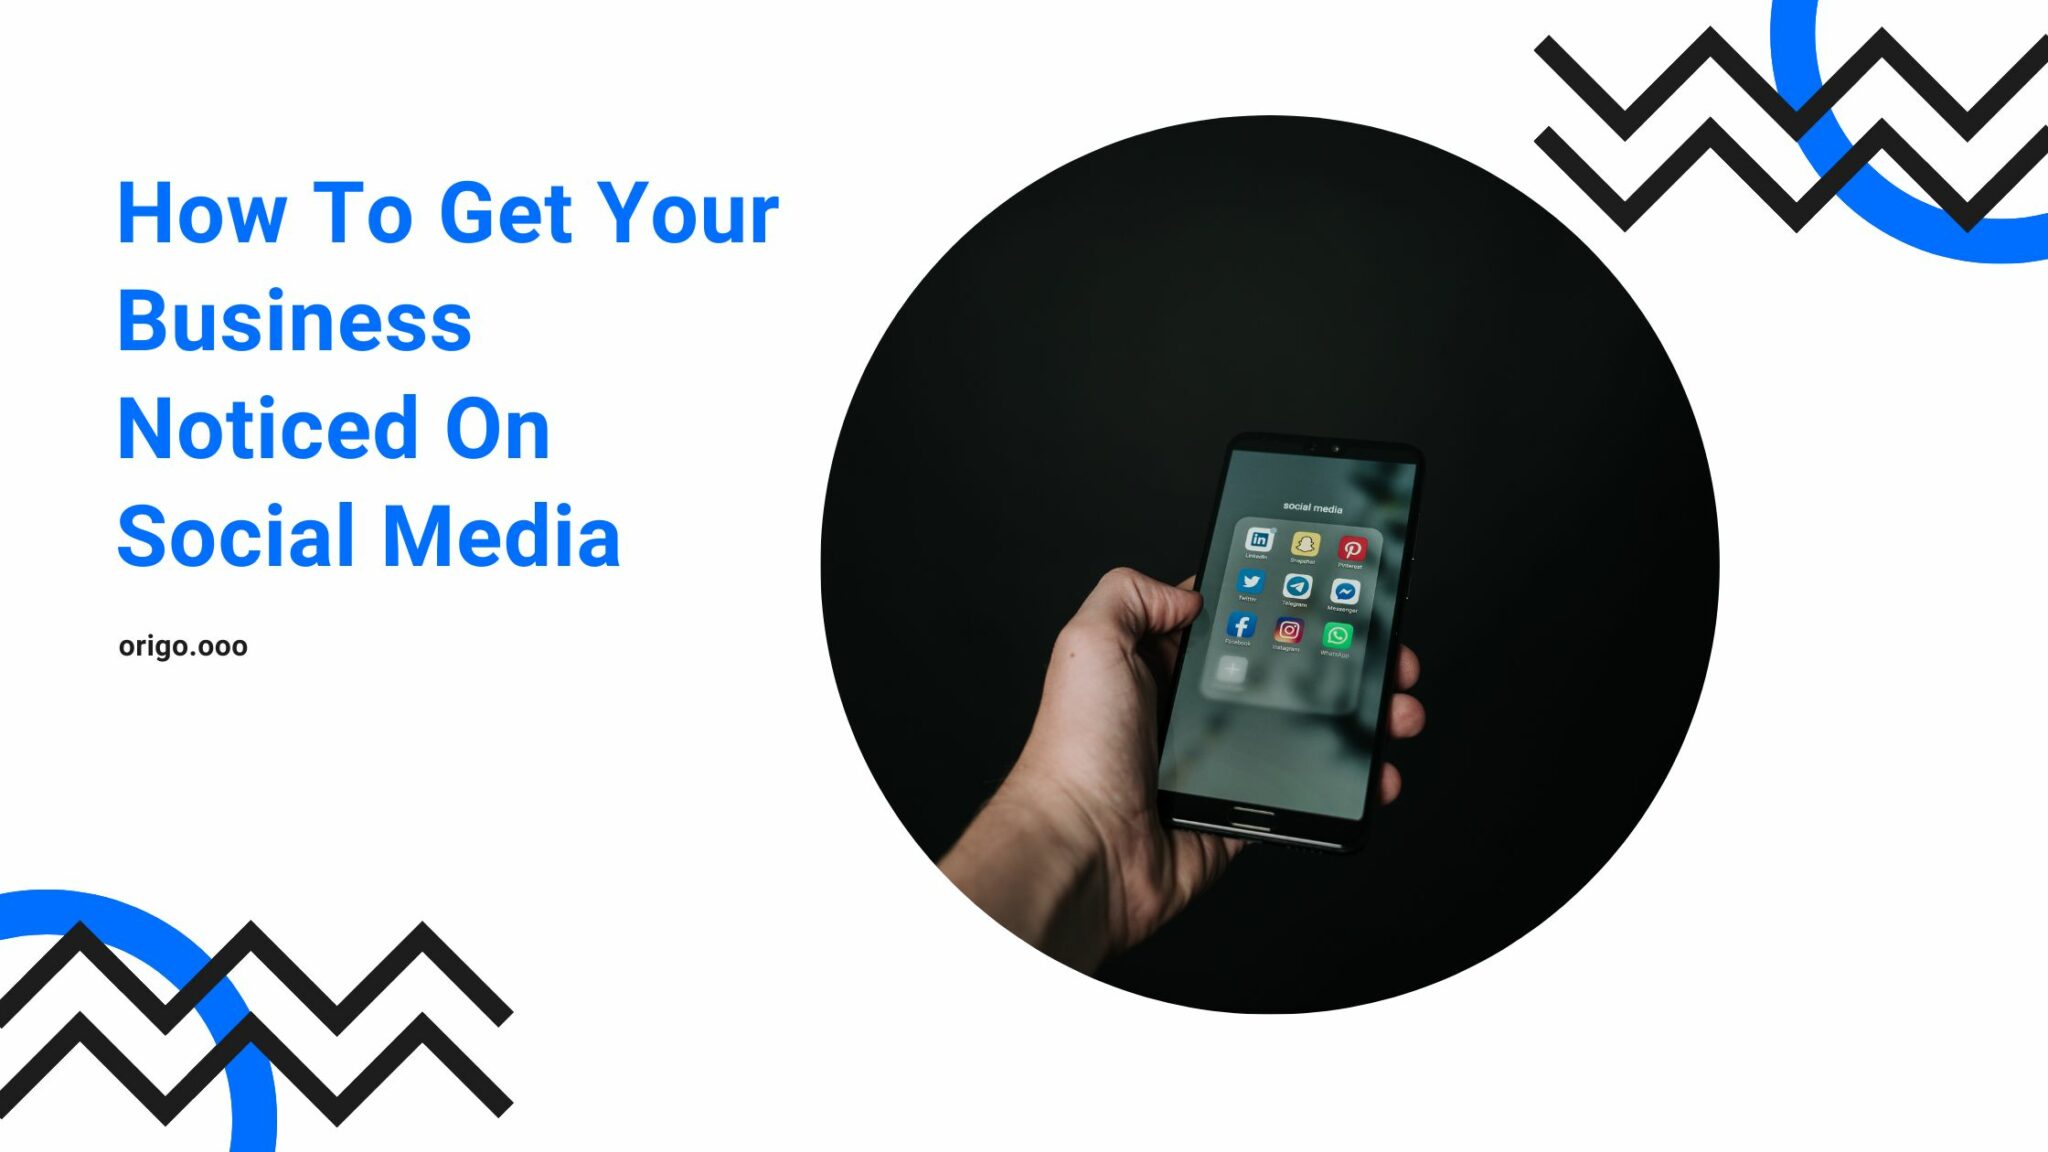 how to get your business noticed on social media